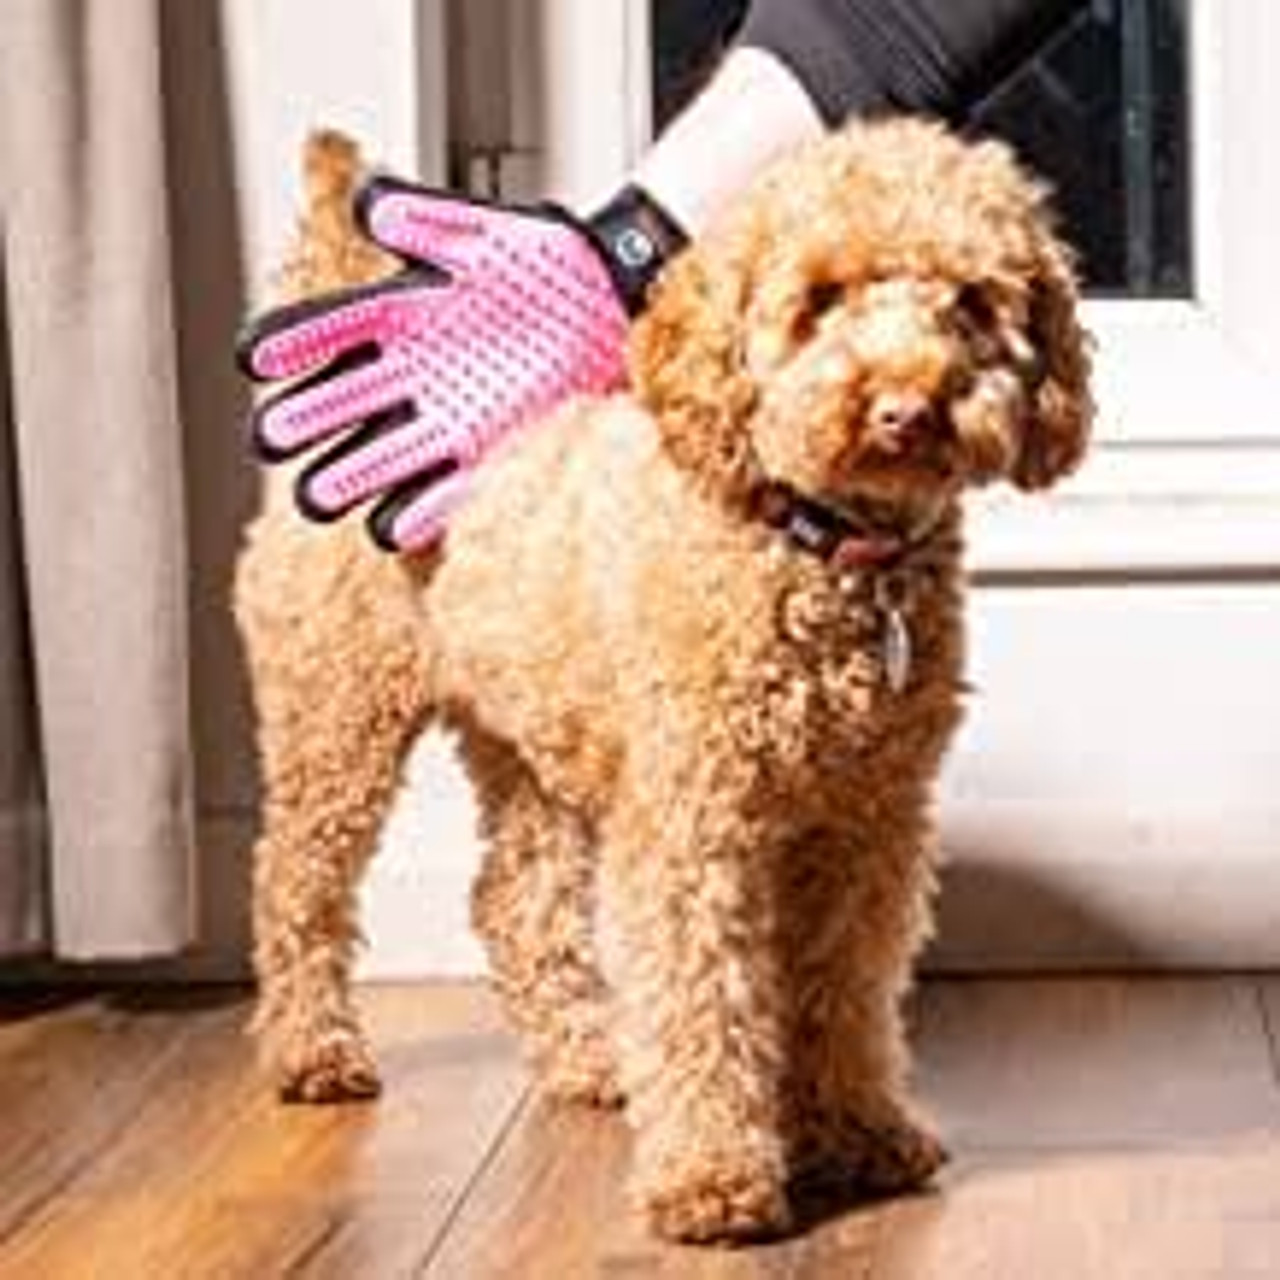 Swizzpets™ pet grooming glove ( Right hand)-various colours